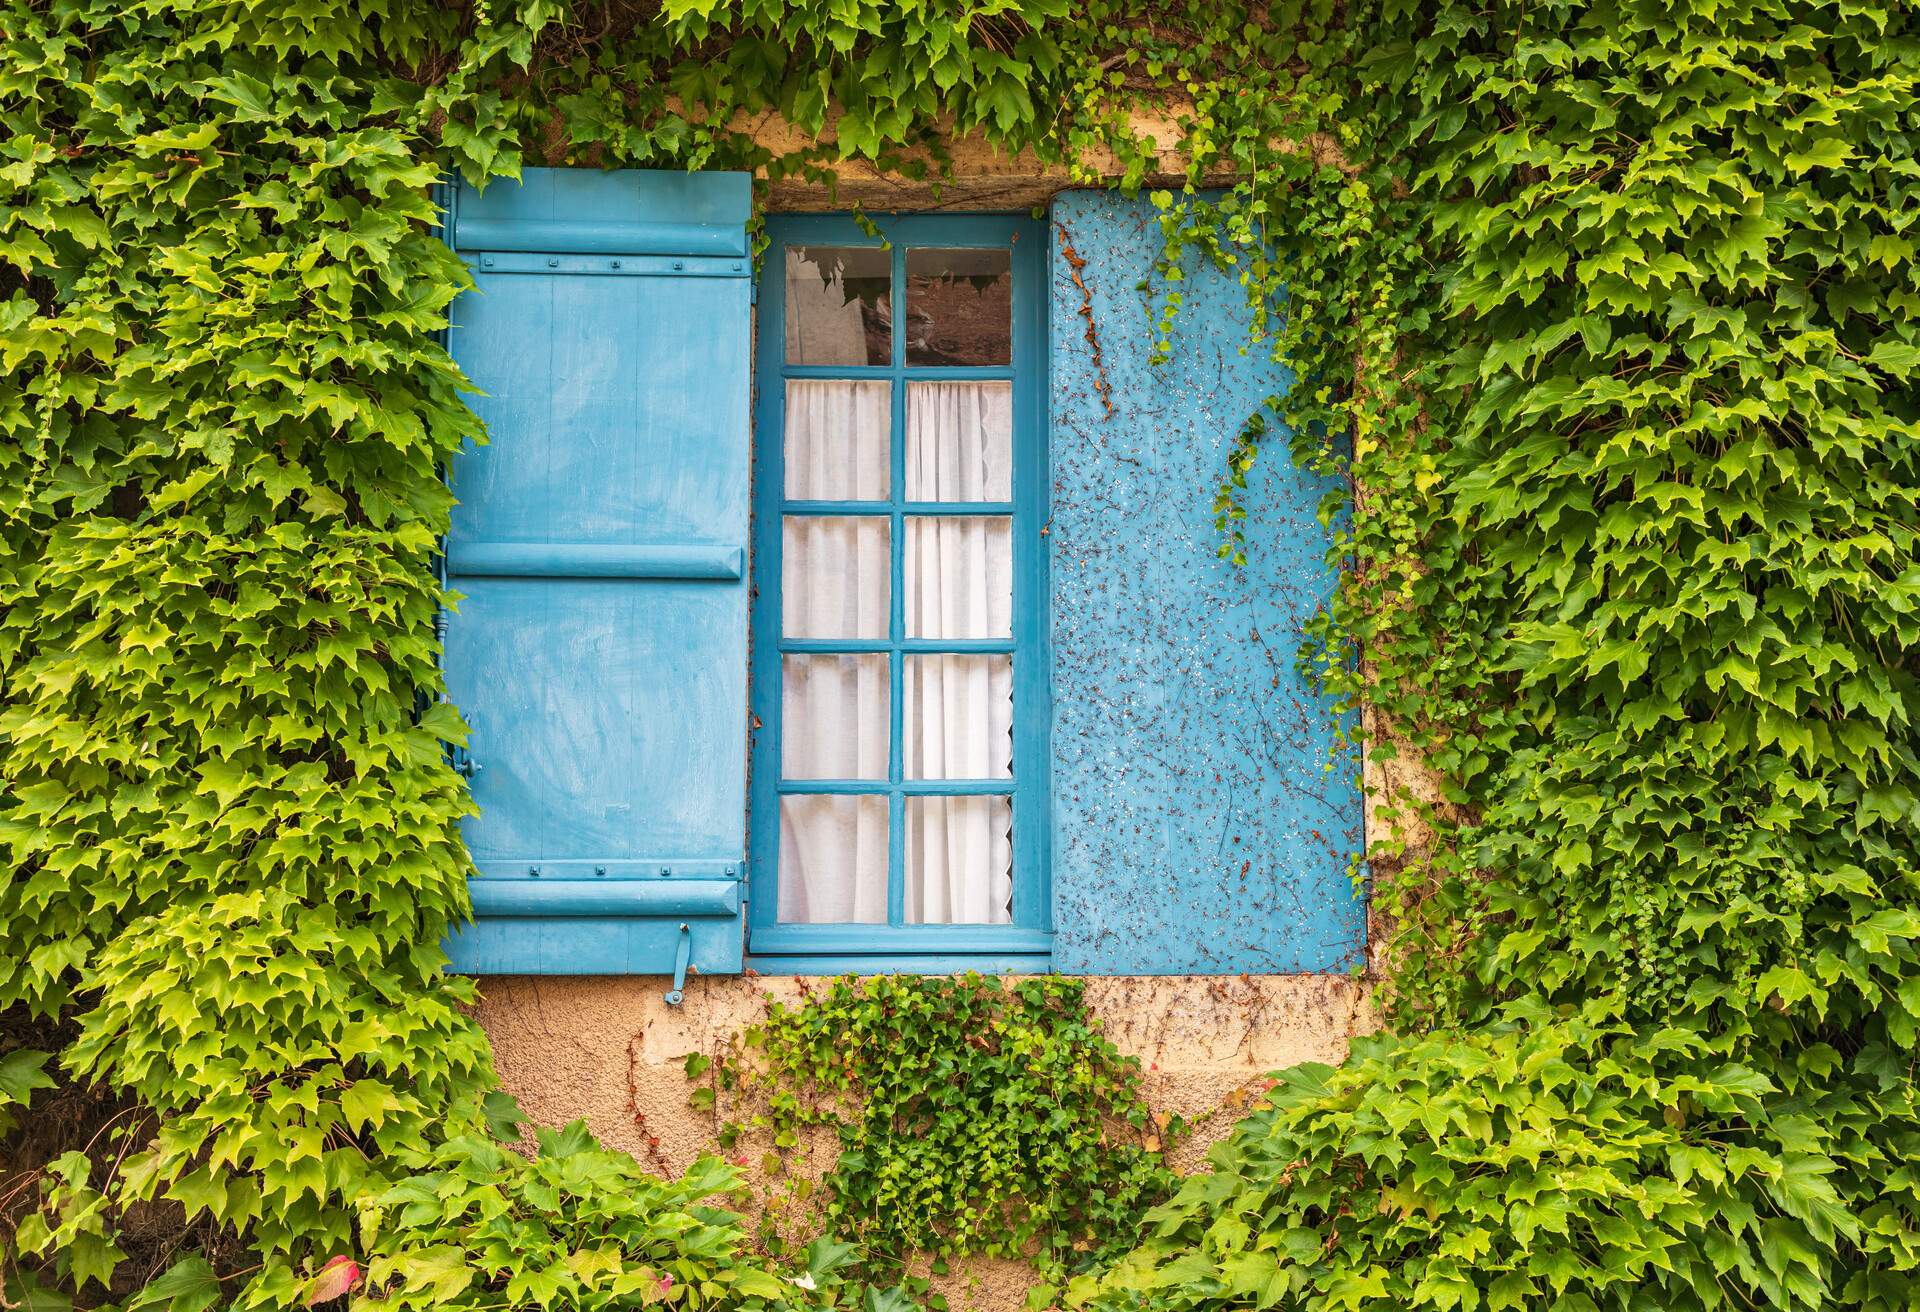 Europe, France, Dordogne, Hautefort. A blue shuttered window in an ivy covered wall in the town of Hautefort.